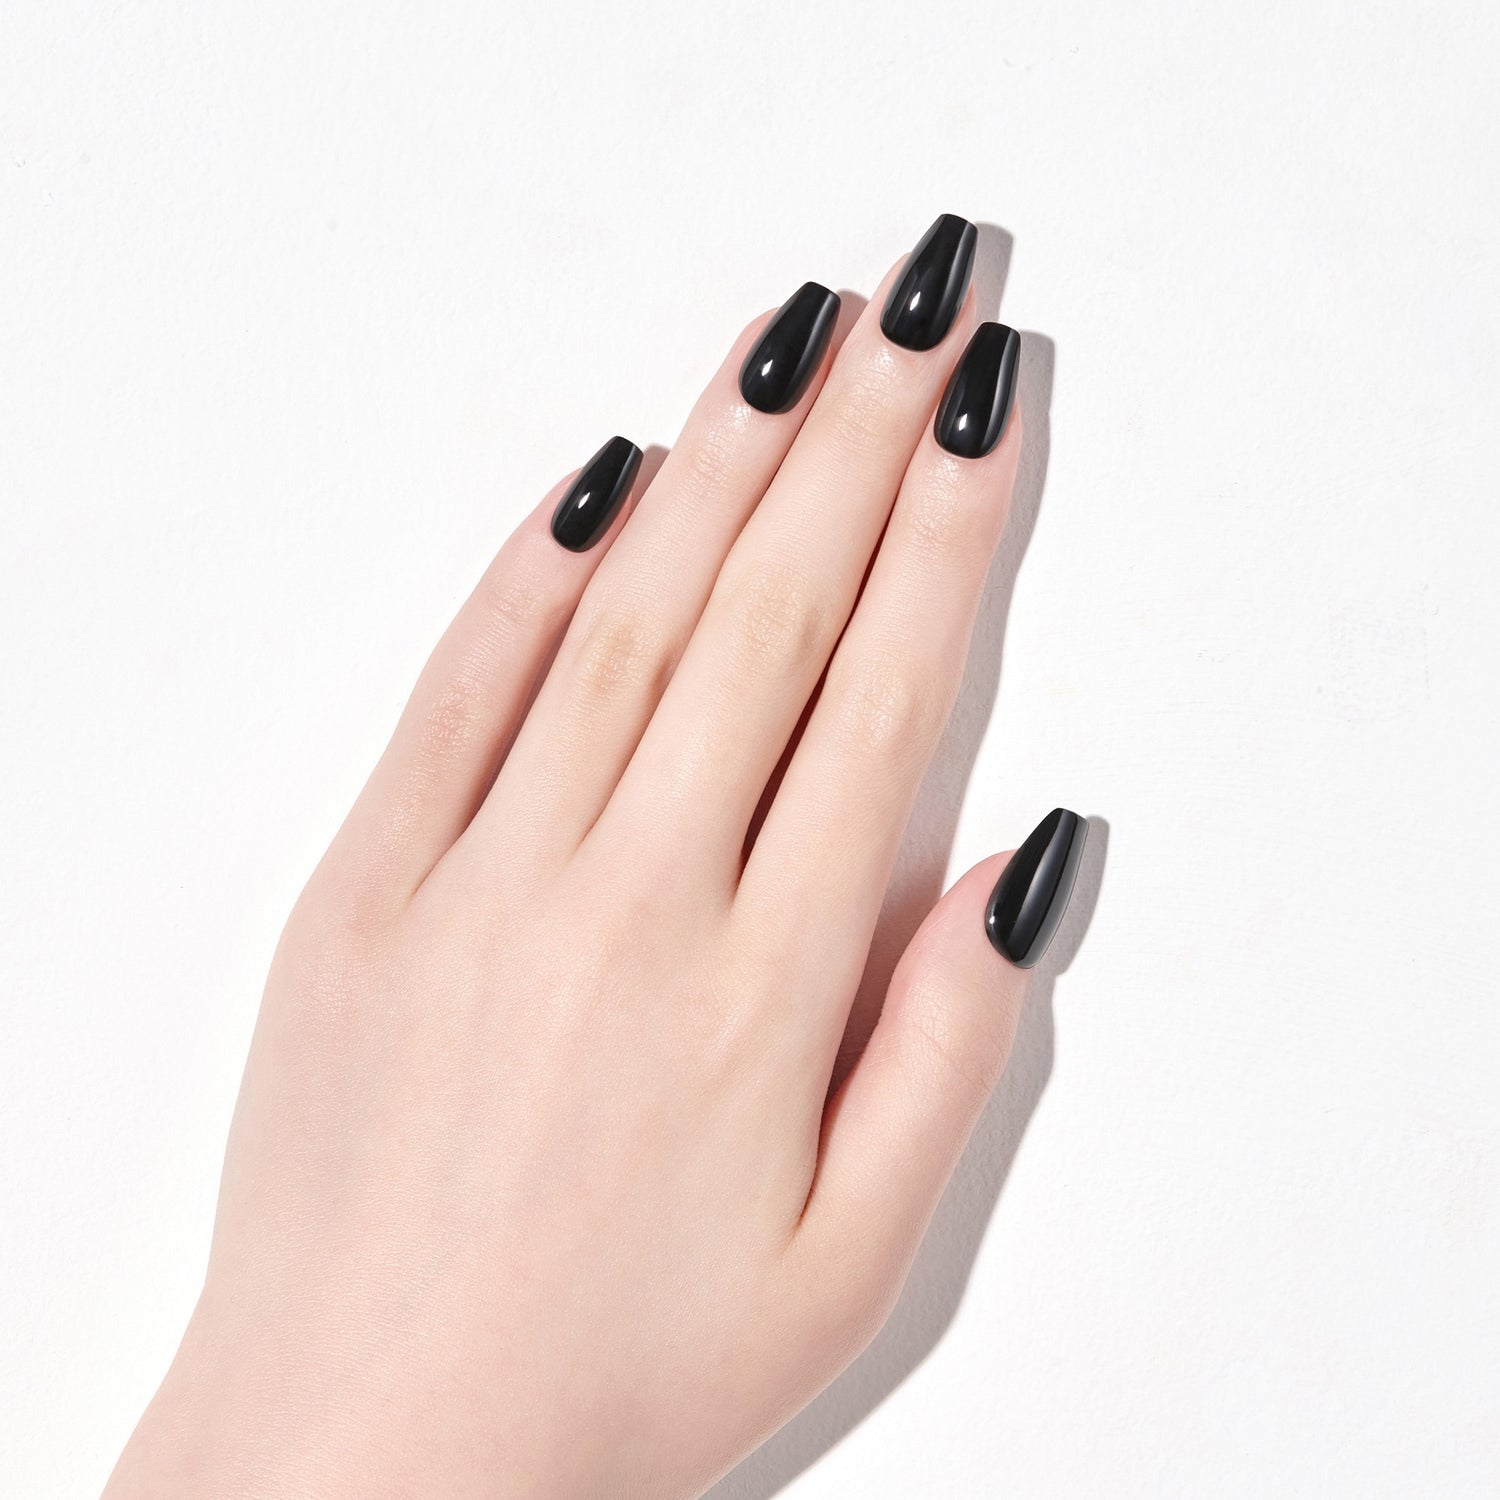 Long length, coffin shape, glossy finish press-on gel nails.